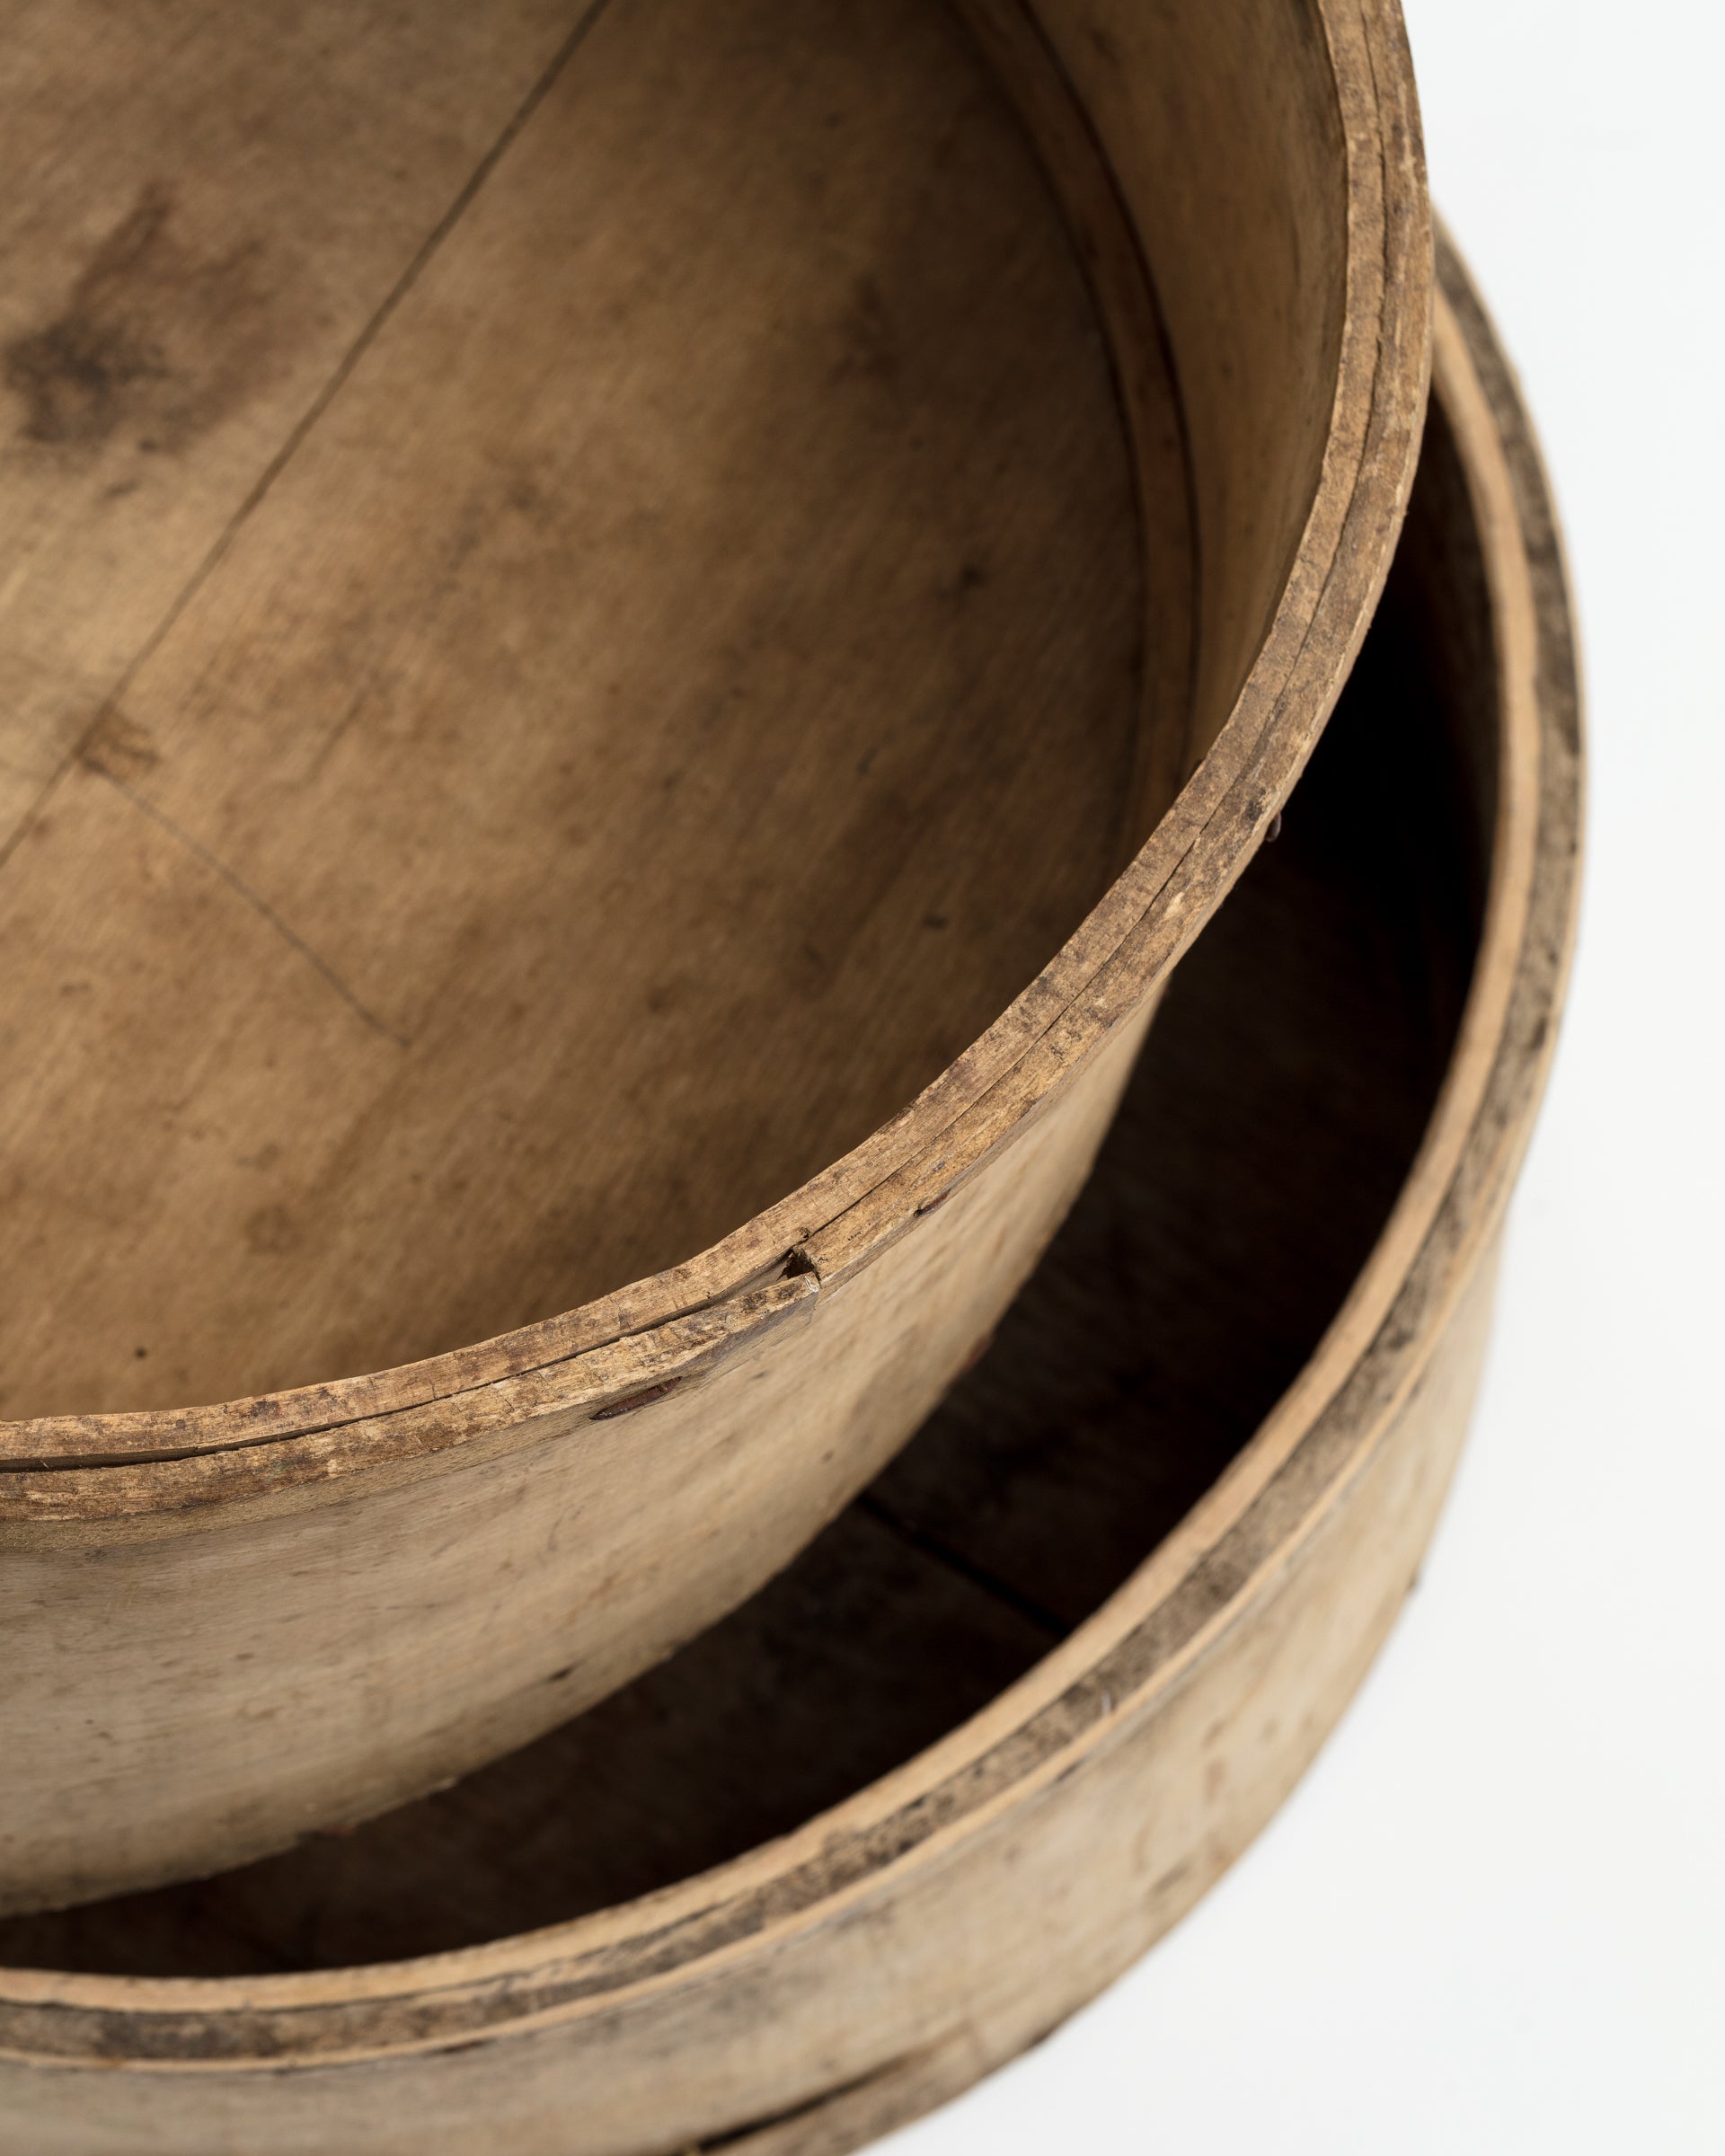 Close-up of two stacked CHEESE MOLD BUCKET 35 from an Indus Design Imports Scottsdale Arizona bungalow, showing aged texture and natural grain, isolated on a white background.